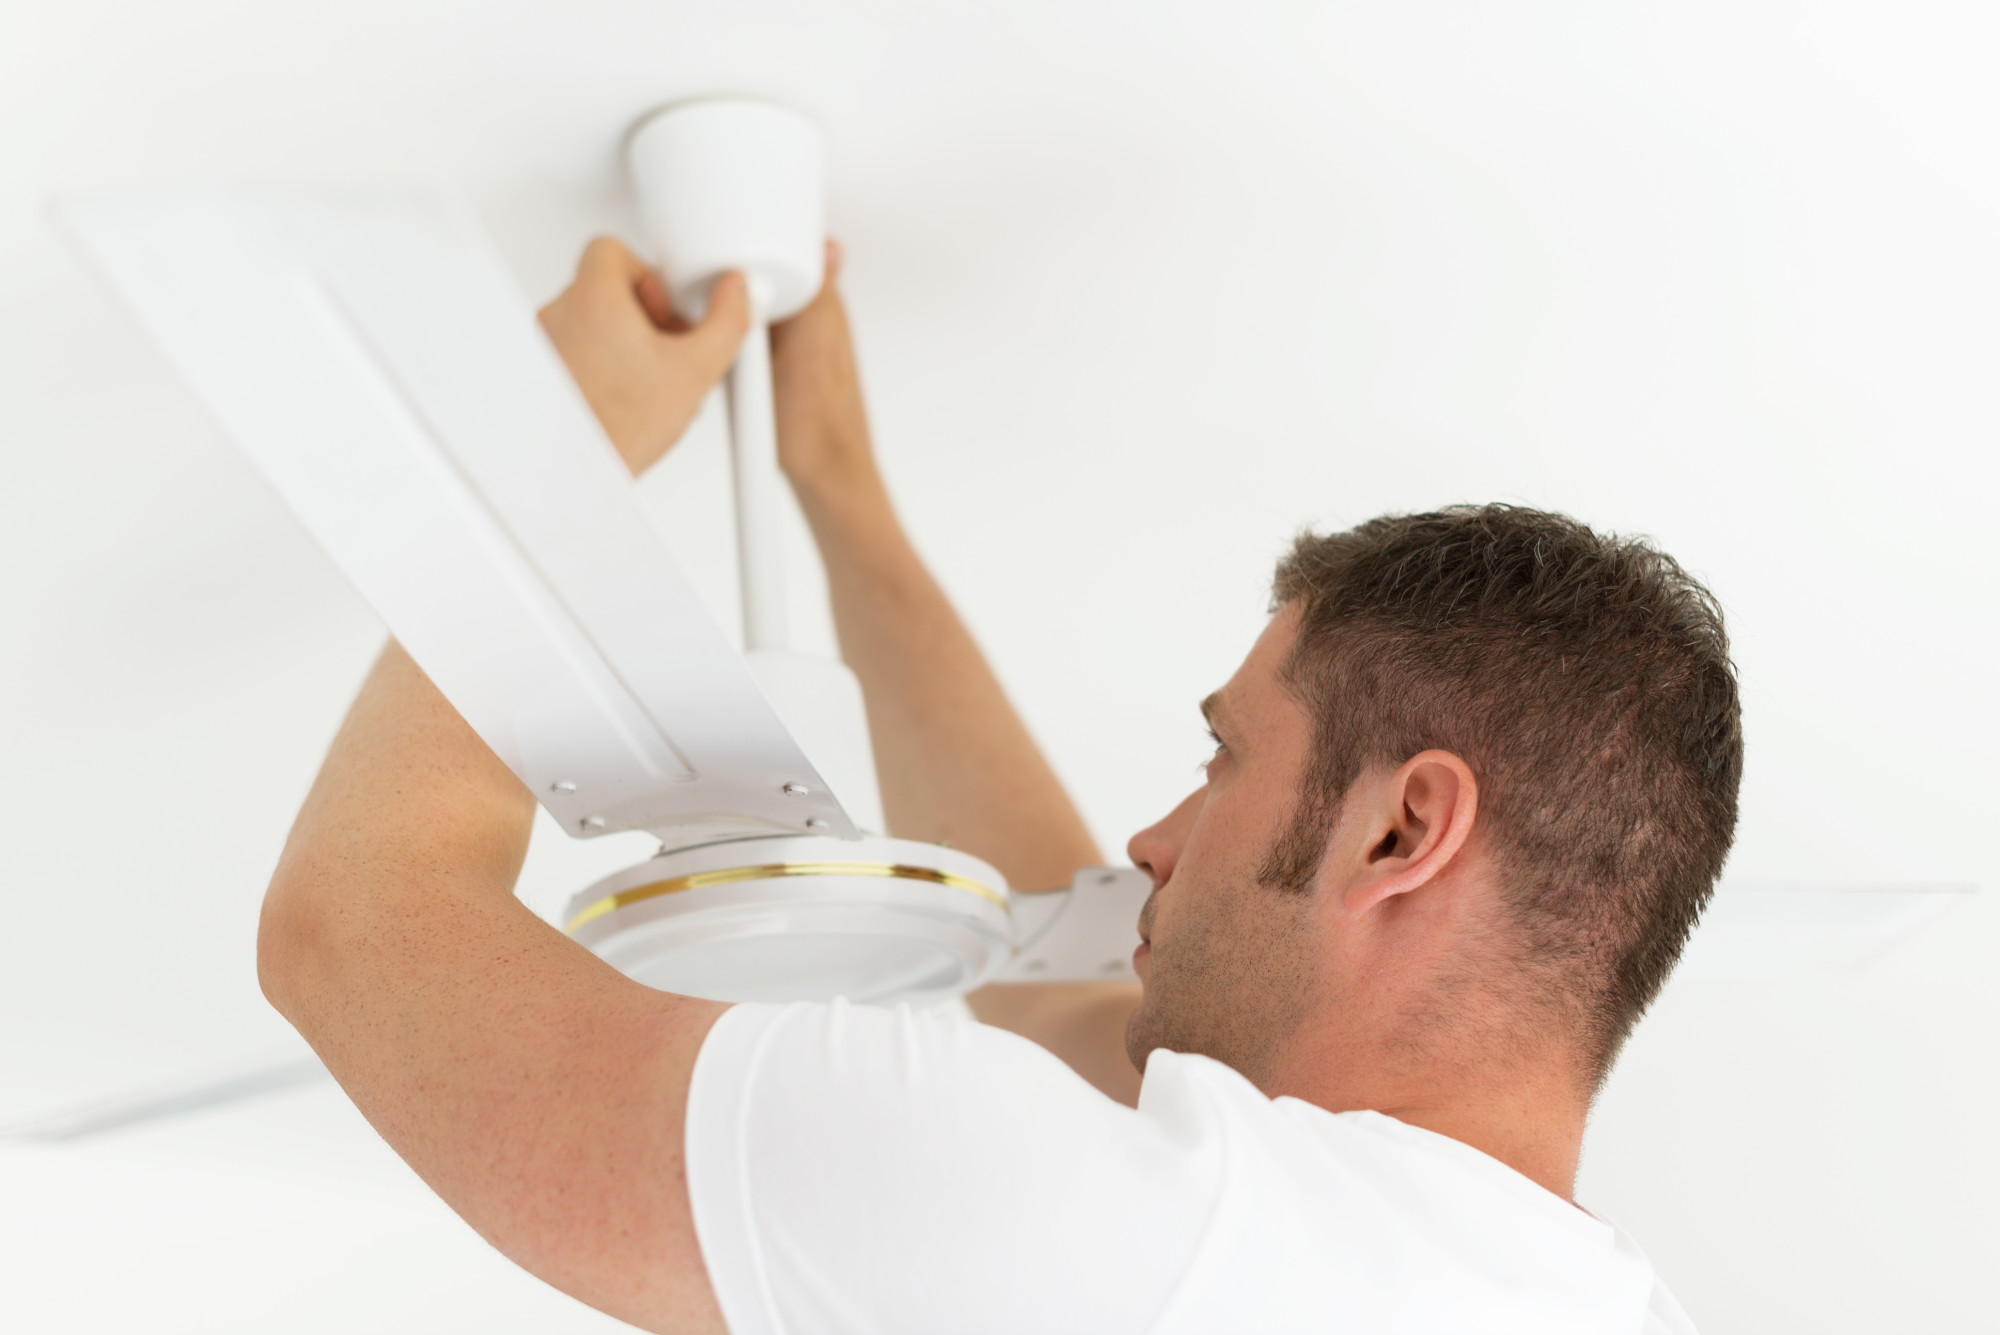 cleaning ceiling fans